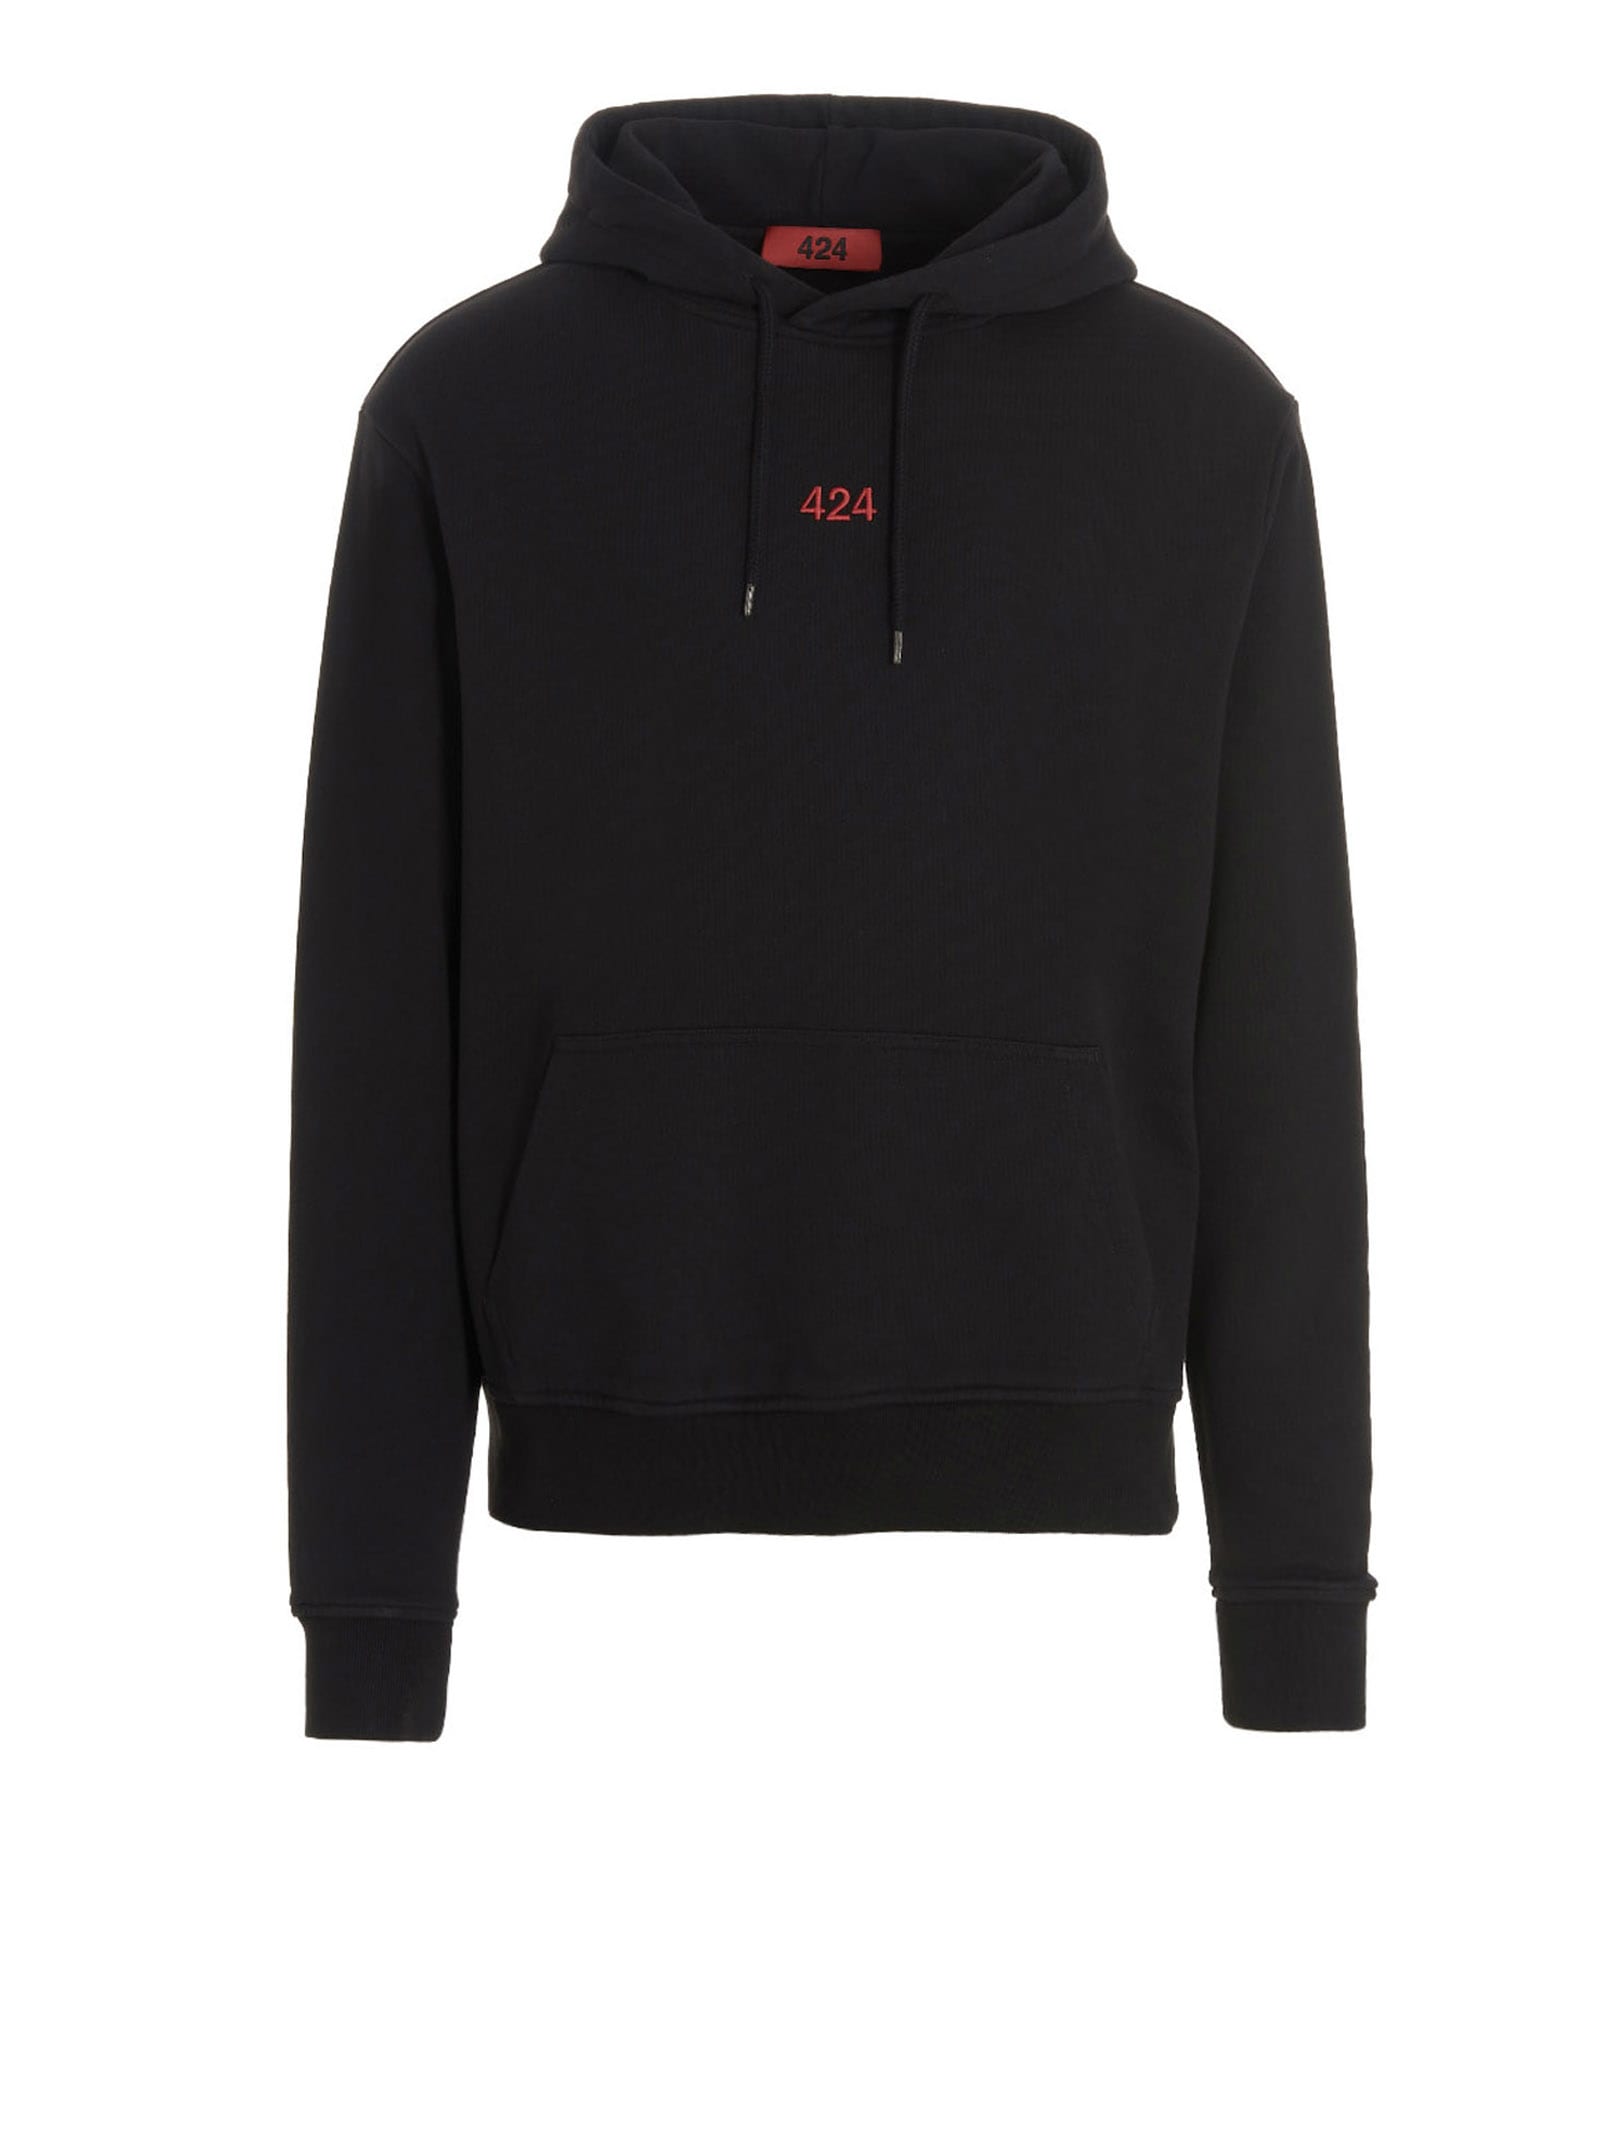 FourTwoFour on Fairfax Logo Embroidery Hoodie